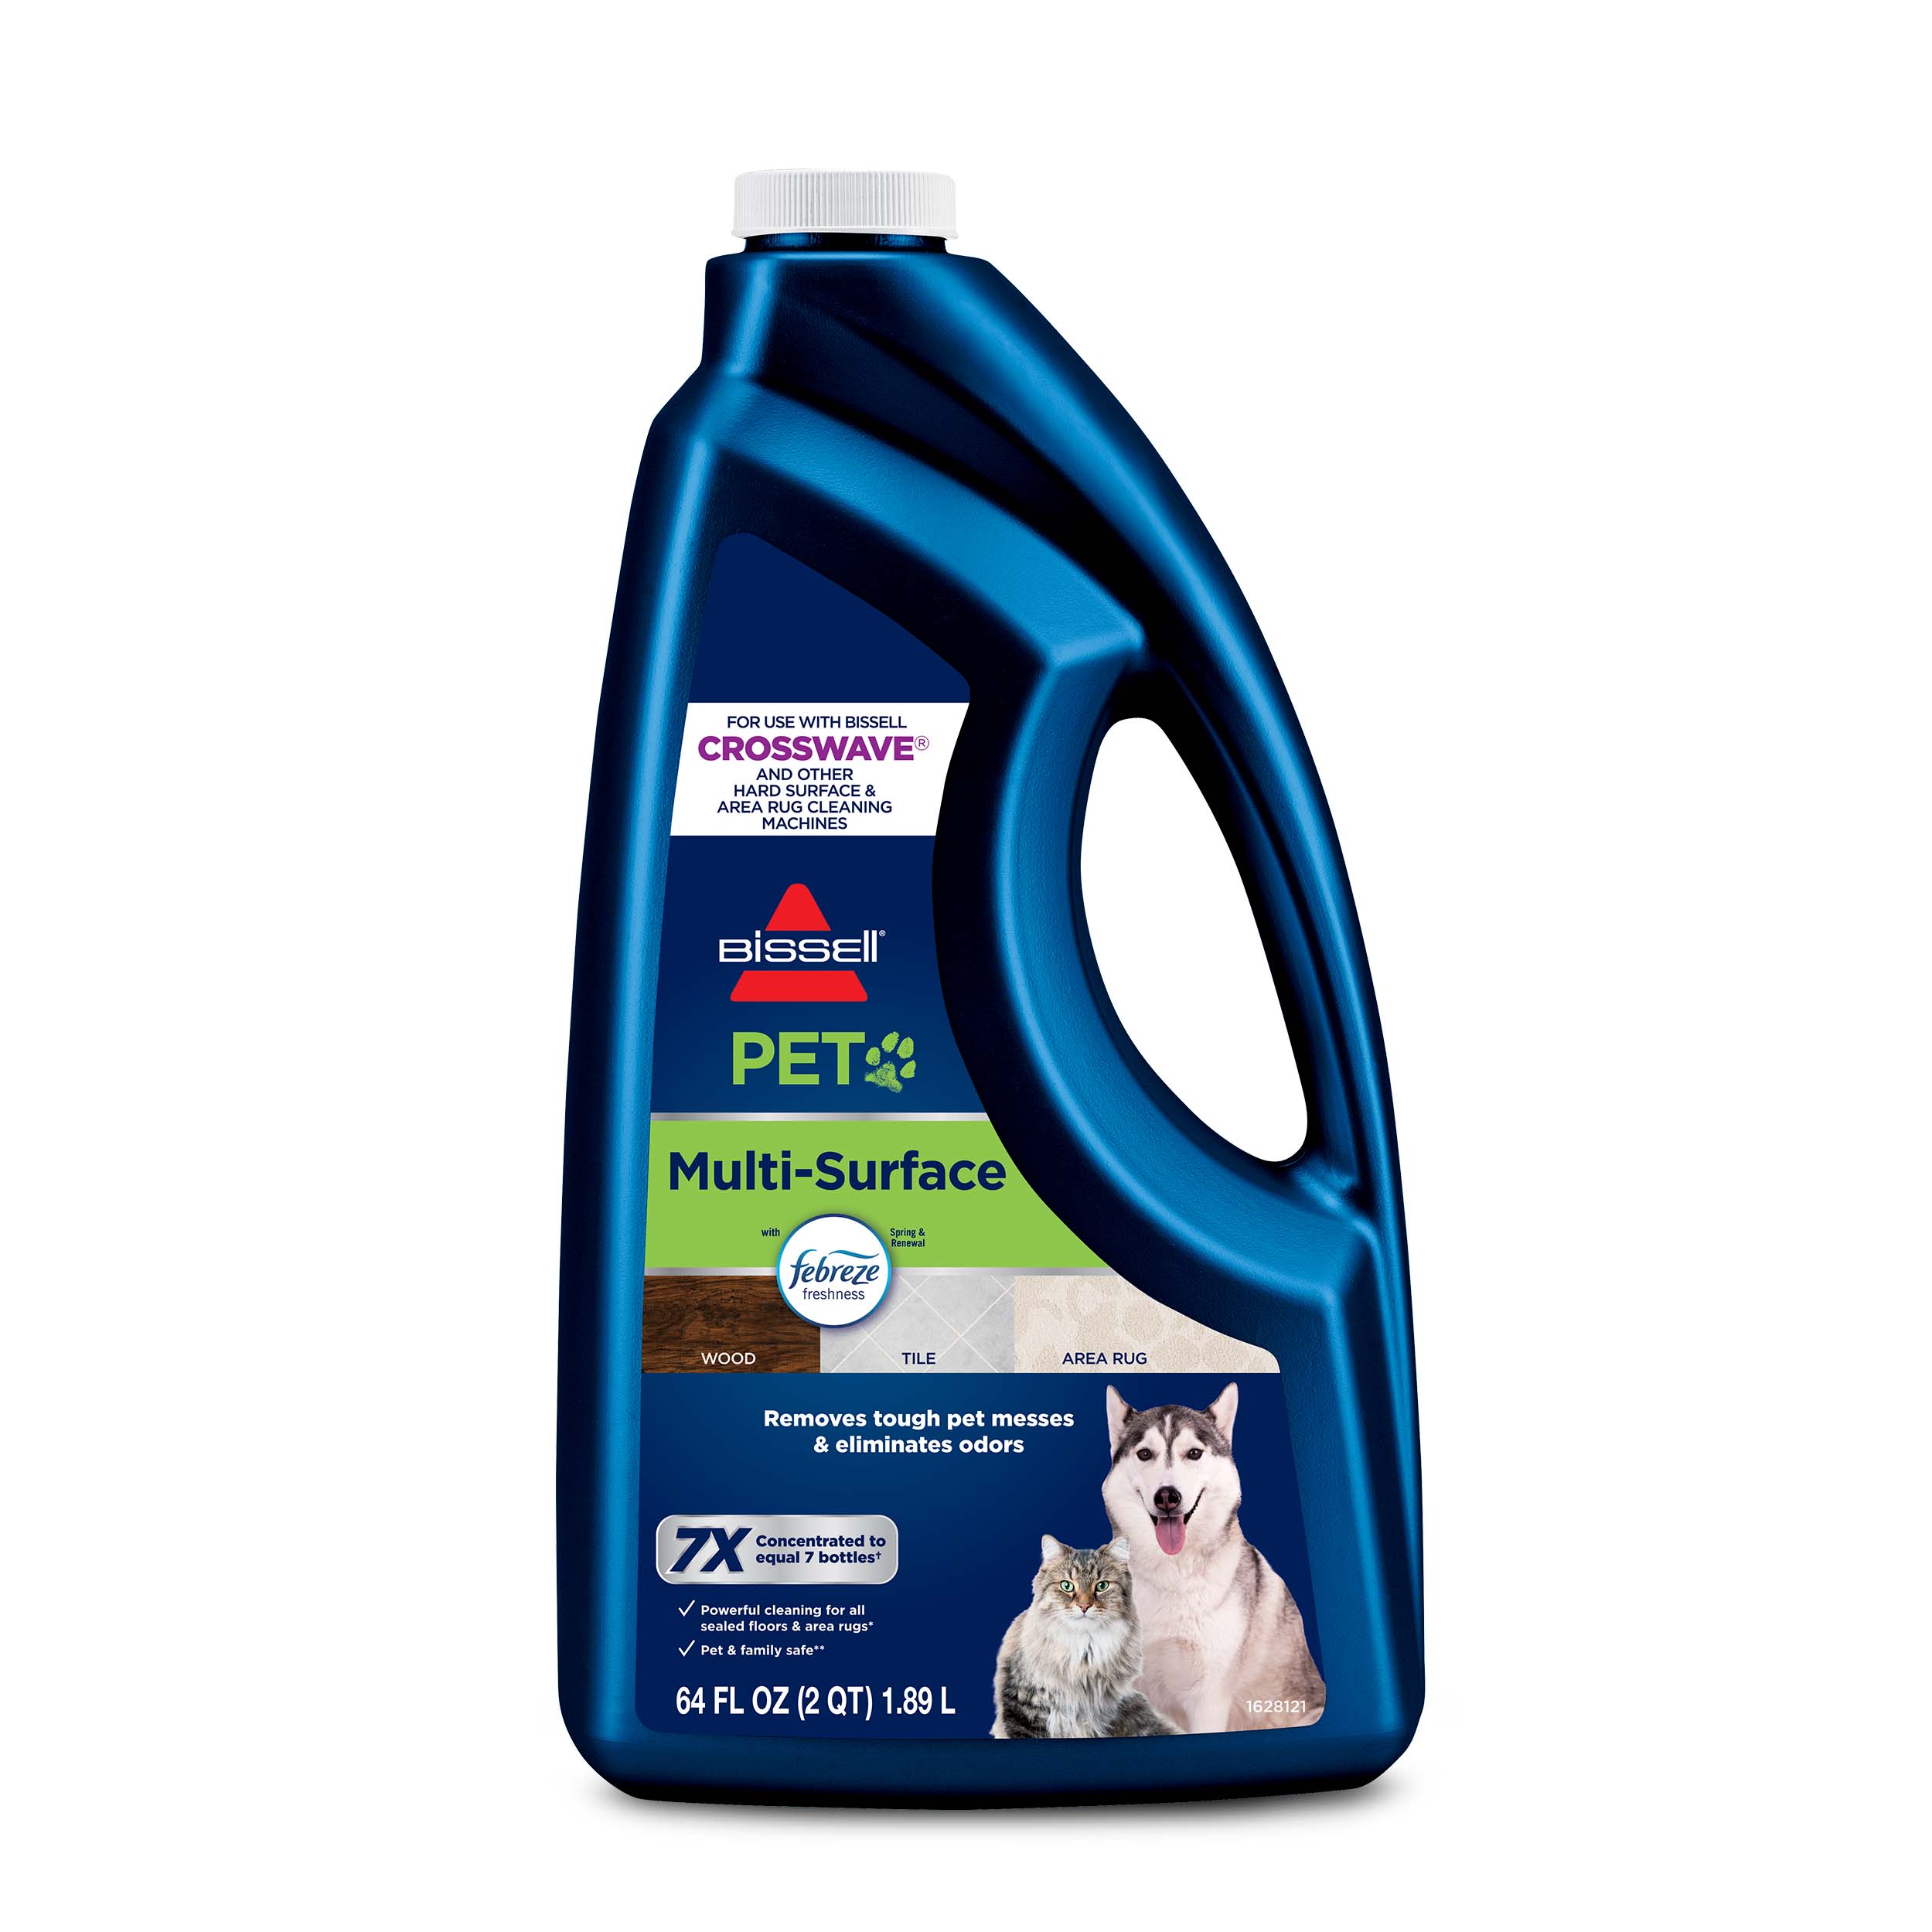 BISSELL Surface Cleaners, Febreze Scent, 64 Fluid Ounce 22951 - image 1 of 8